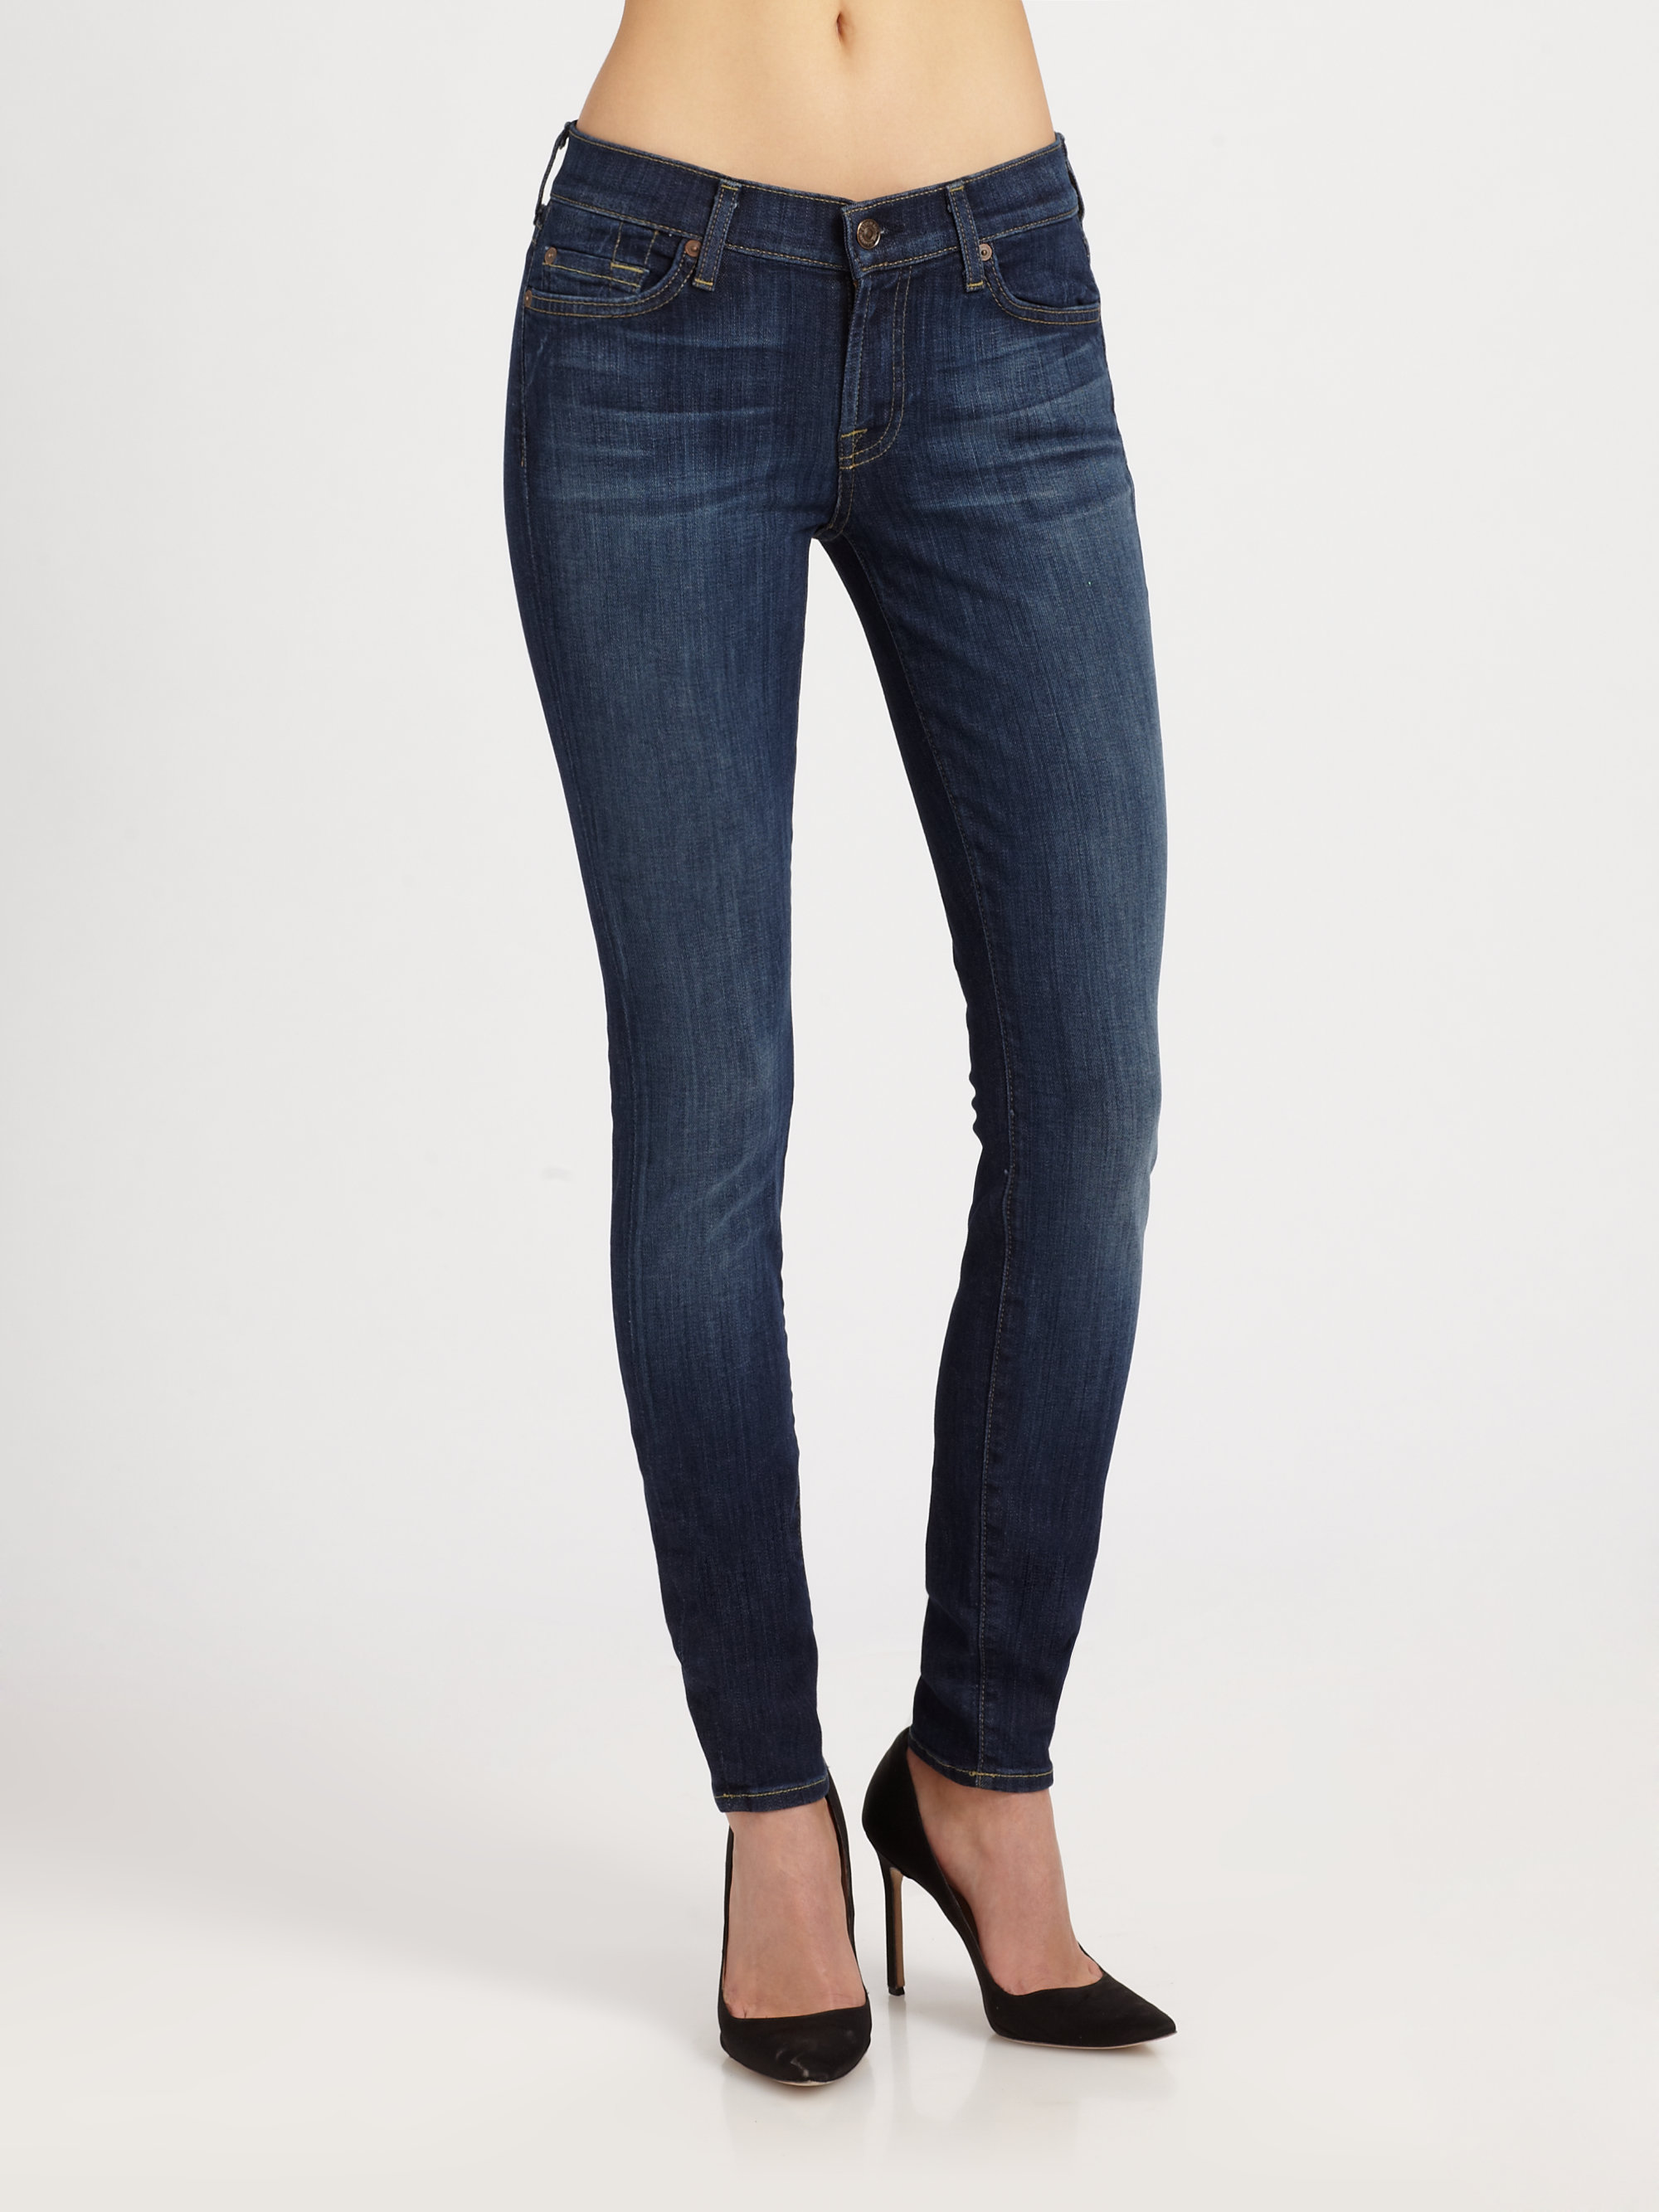 Lyst - 7 for all mankind The Skinny Nouveau New York Jeans in Blue